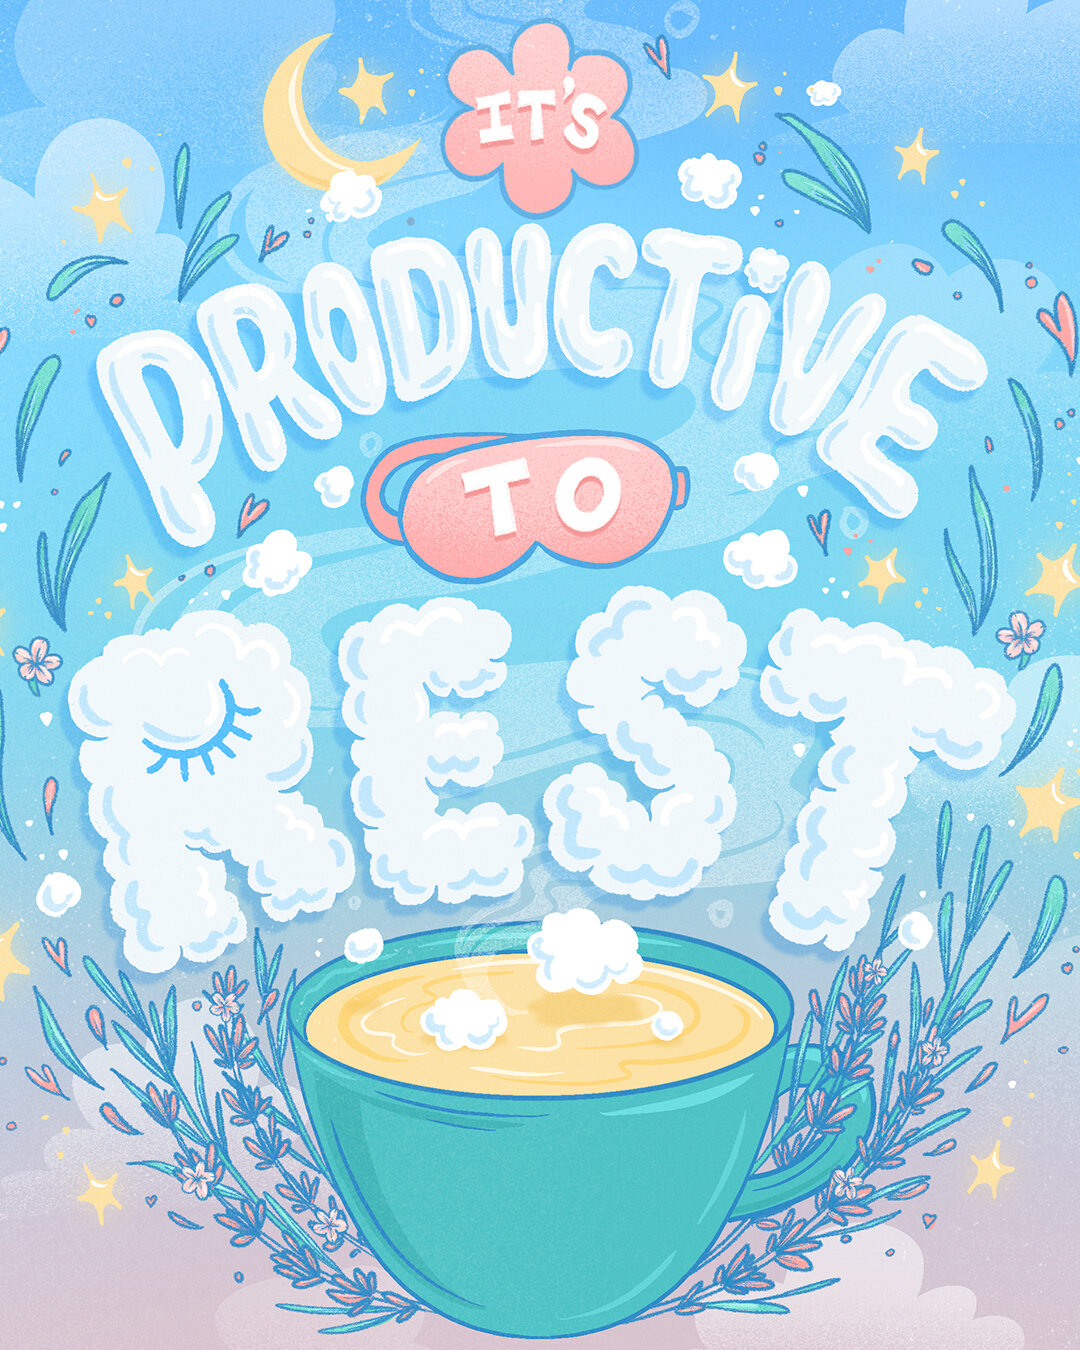 2021-self-care-lettering-cups-productive-to-rest-4.jpg